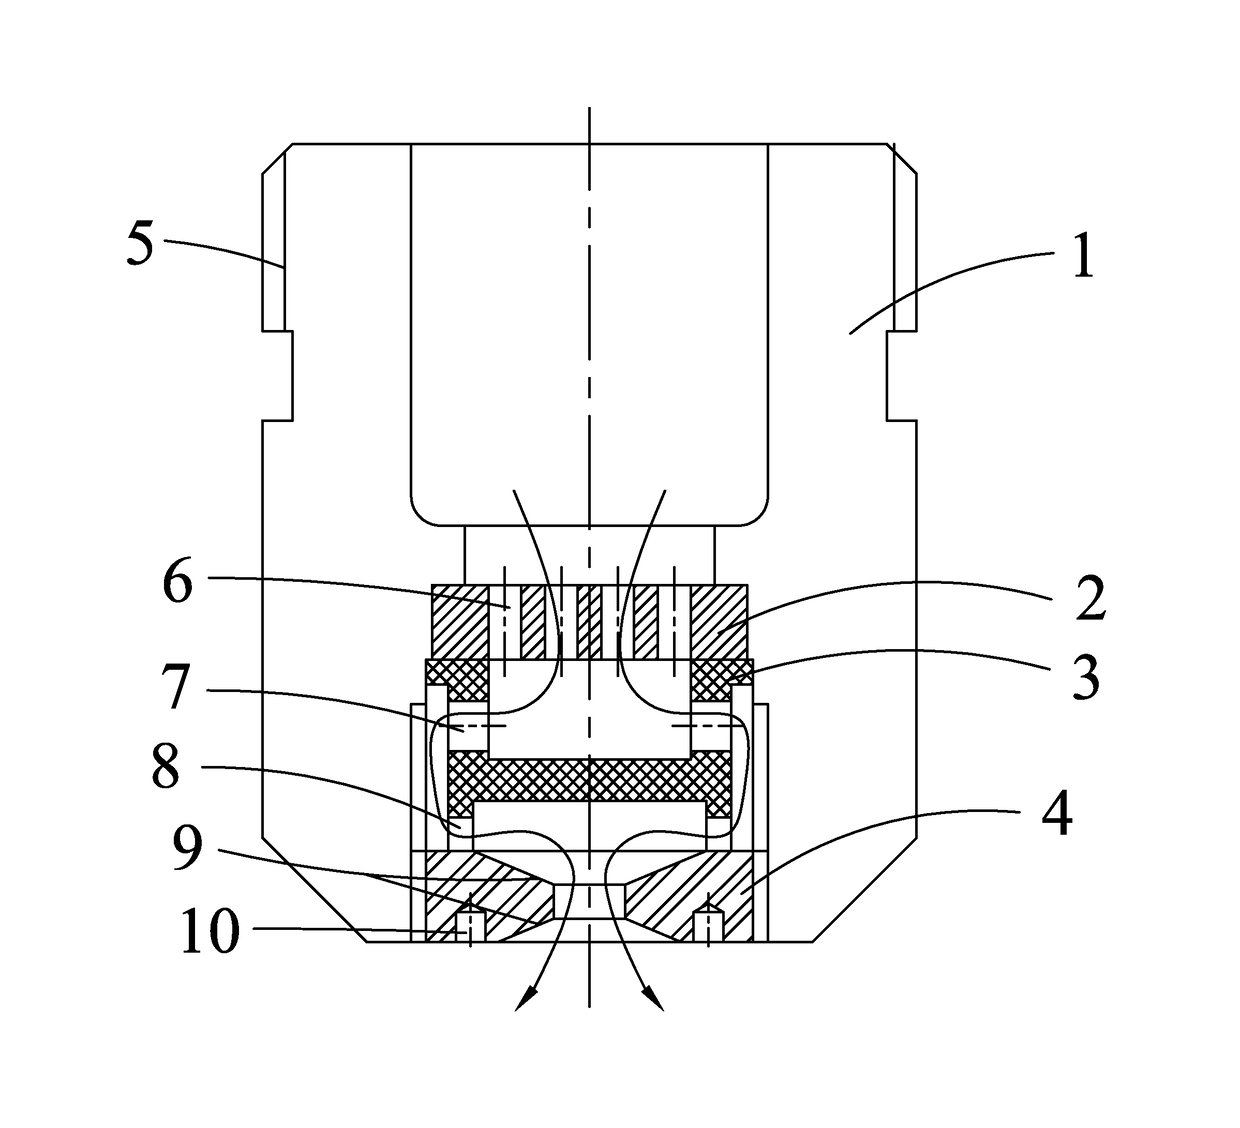 Multistage decompression and micro flow atomizing nozzle